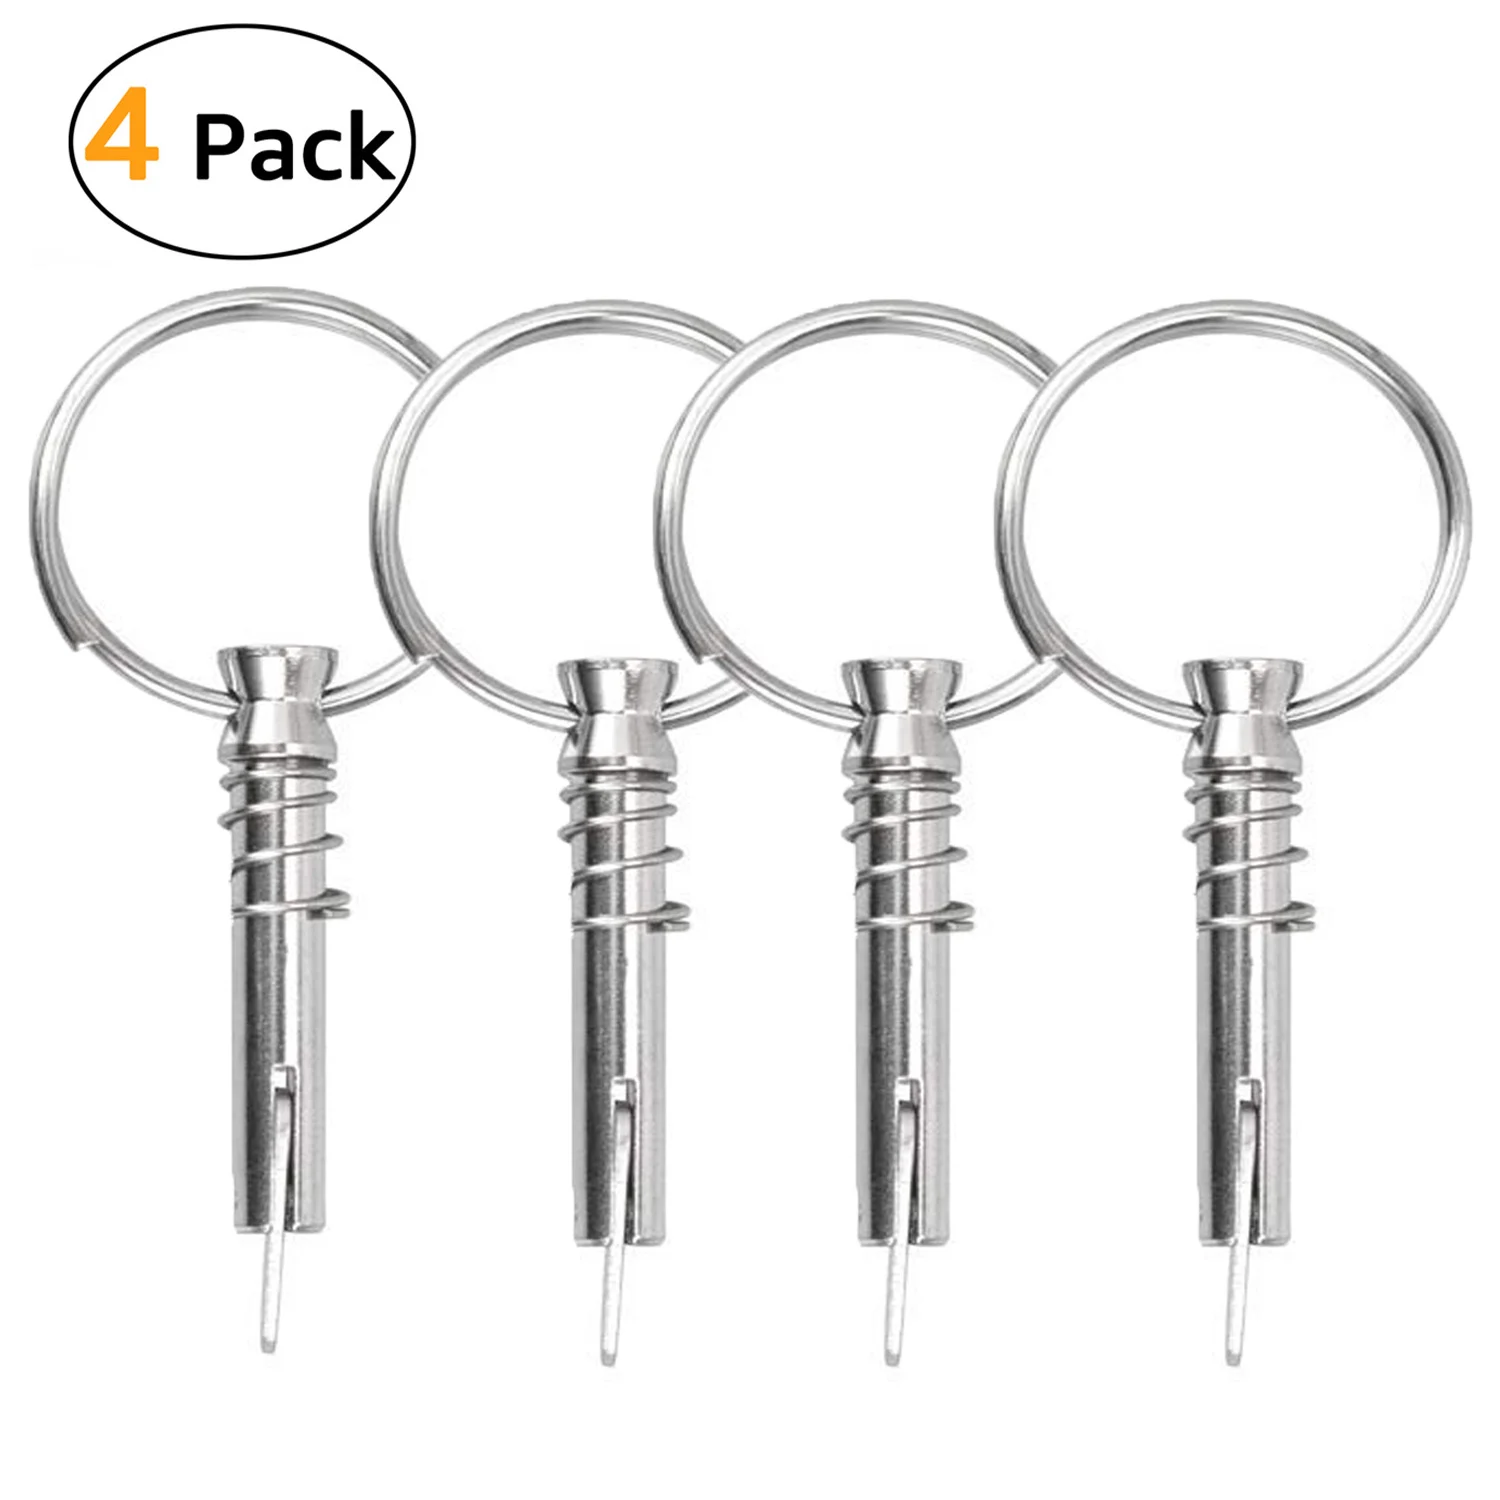 Quick Release Pin, Bimini Top Pin  With Ring, Diameter 1/4 Inch, Bimini Top Deck Hinge Marine Hardware  (4 or 10 Pcs) vcn118 inch dia 3 16 1 stainless steel quick release locking pin l handle ball lock pins with ring usable length 0 5 7